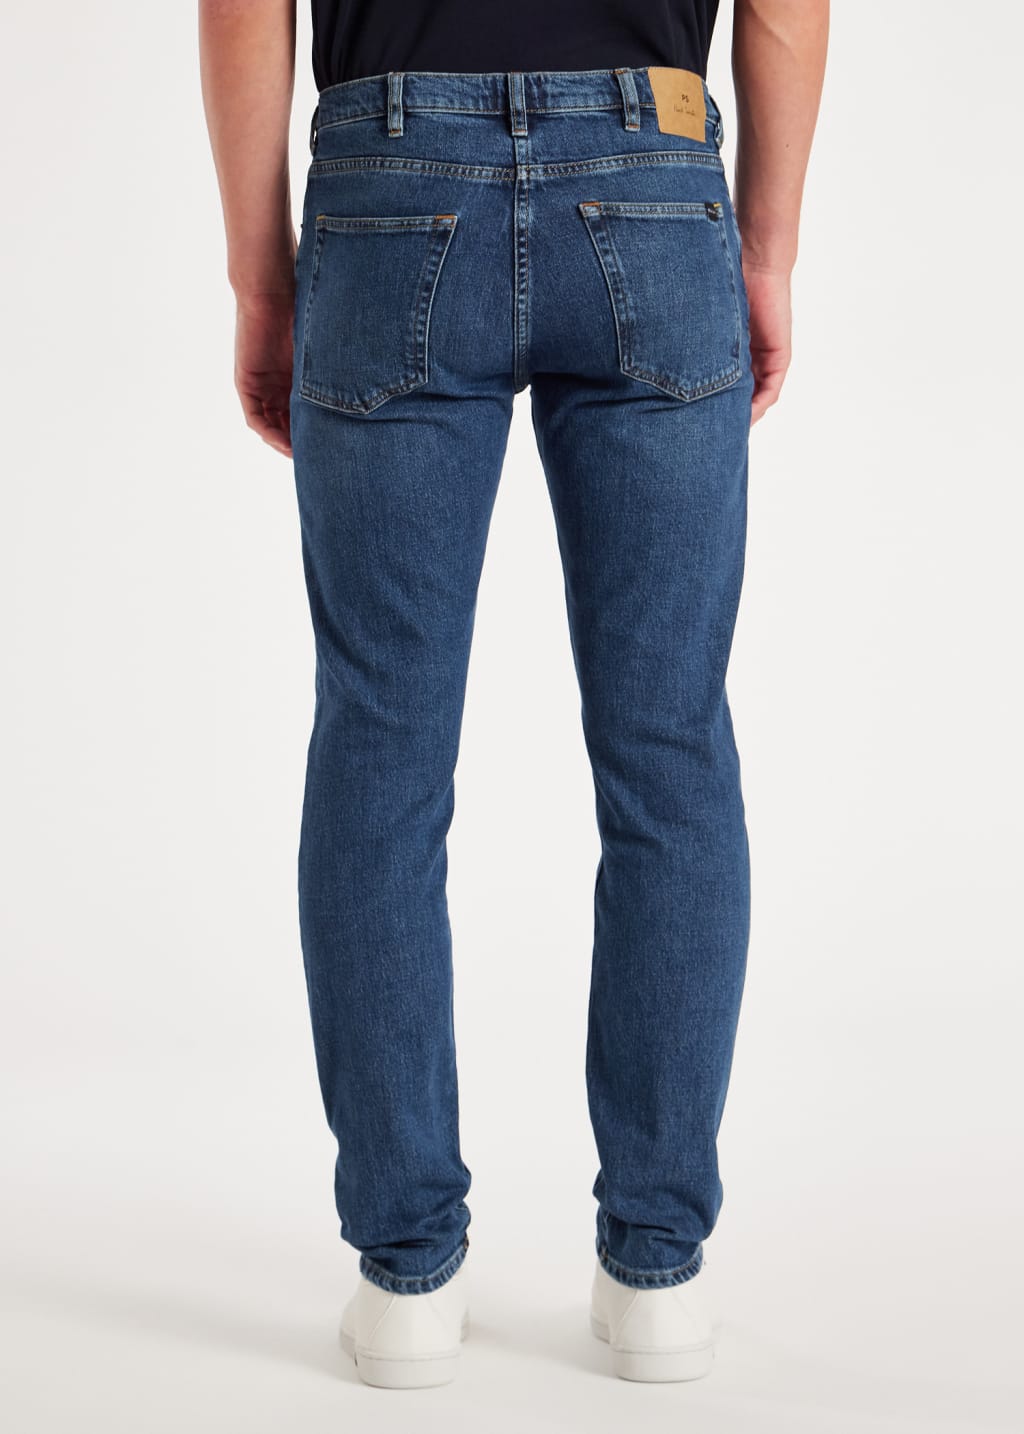 Model View - Tapered-Fit Mid Blue Wash 'Organic Vintage Stretch' Jeans Paul Smith